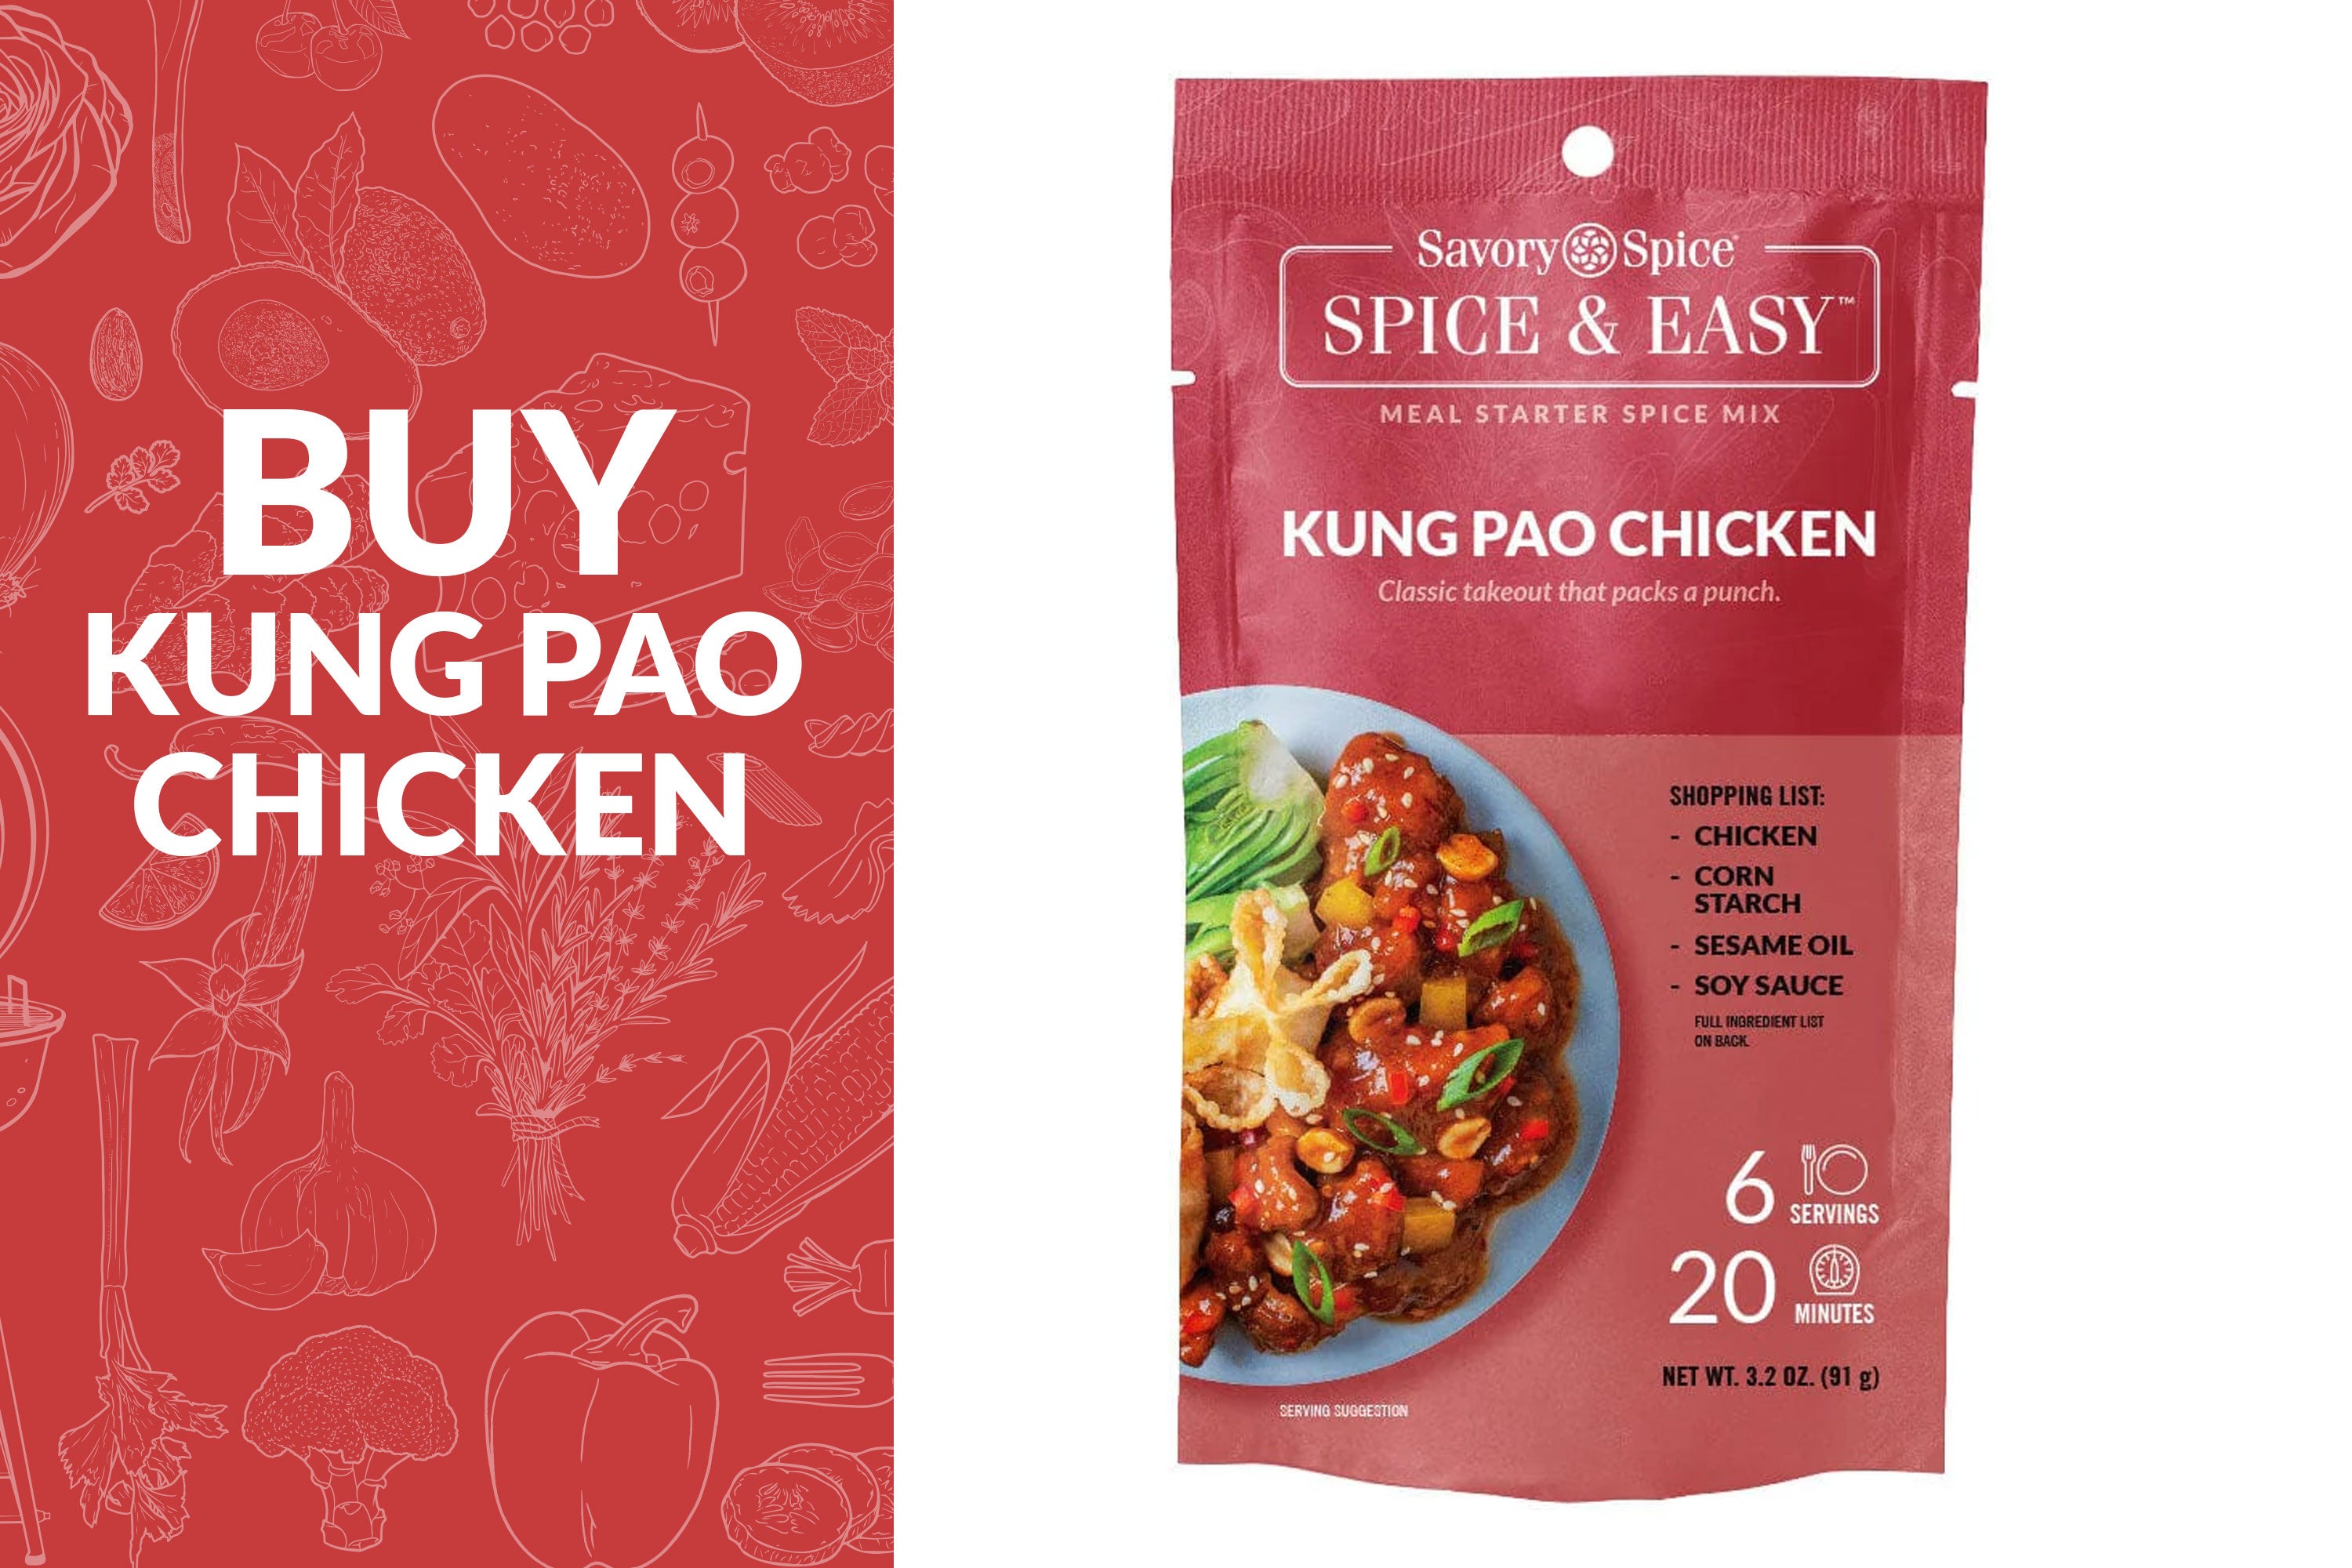 Buy Kung Pao Chicken on the left with Spice & Easy Meal Starter Spice Mix on the right